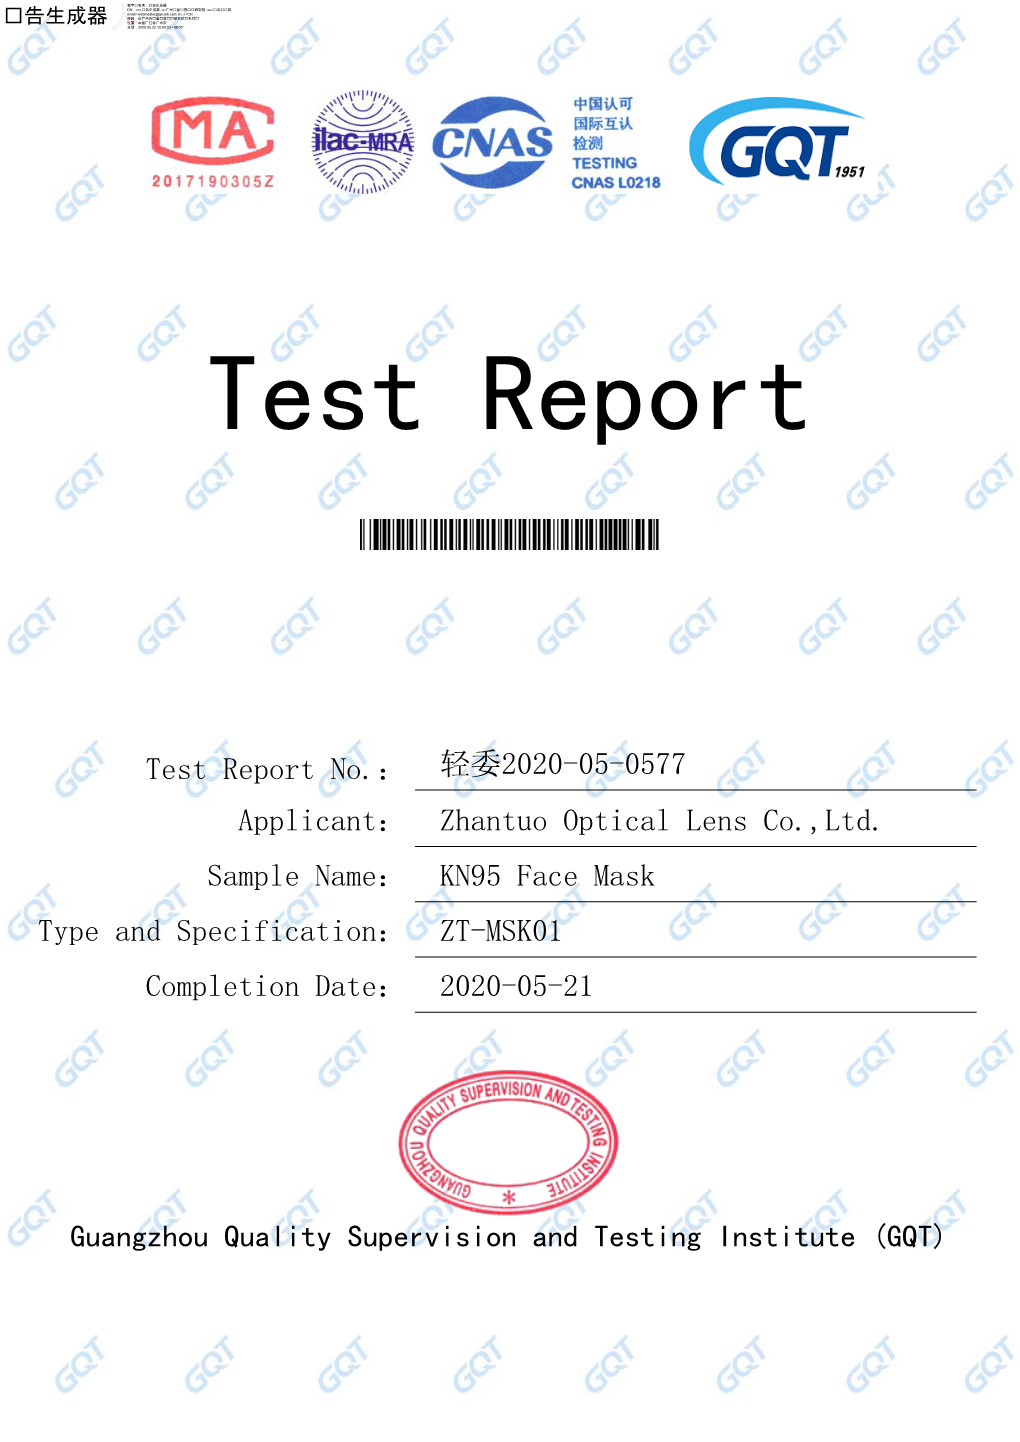 Test Report Guangzhou Quality Supervision And